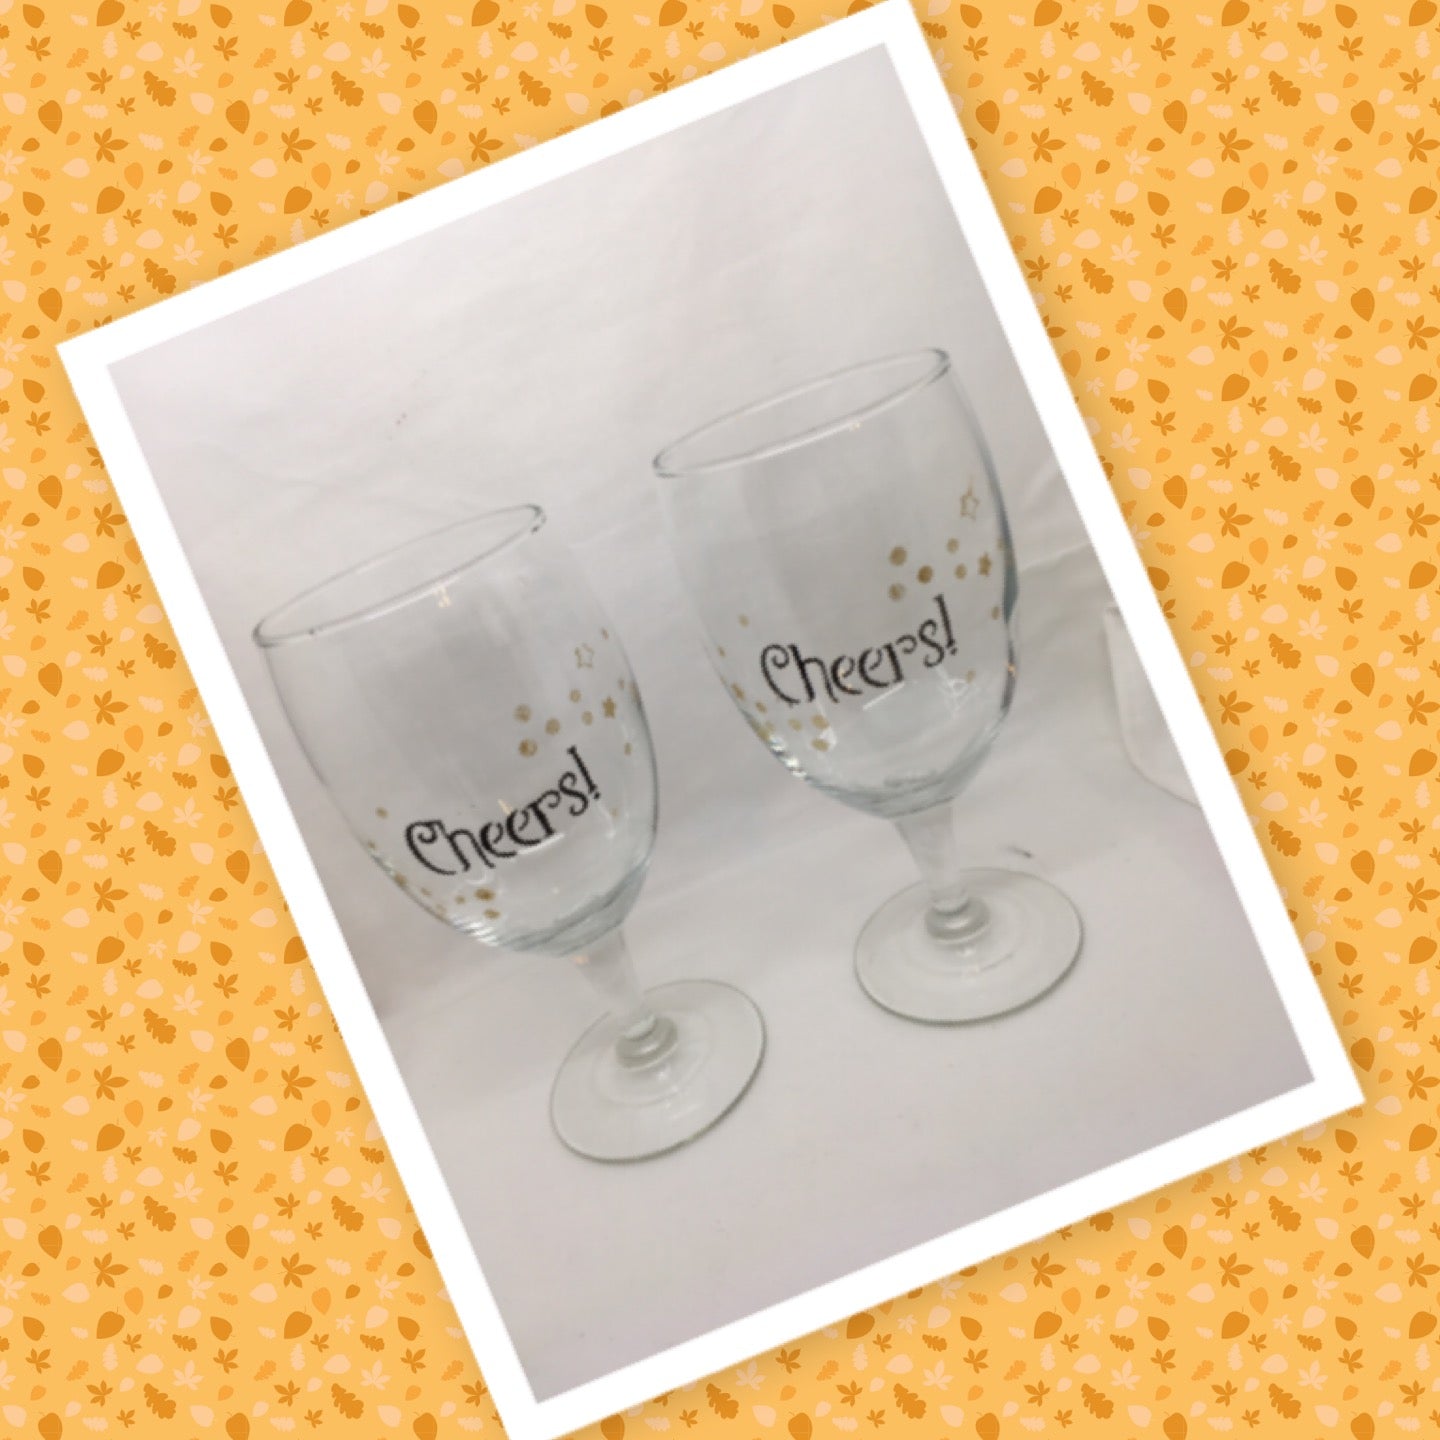 Painted Wine Glasses, Cute Wine Glasses, Newlywed Gift, Gift for